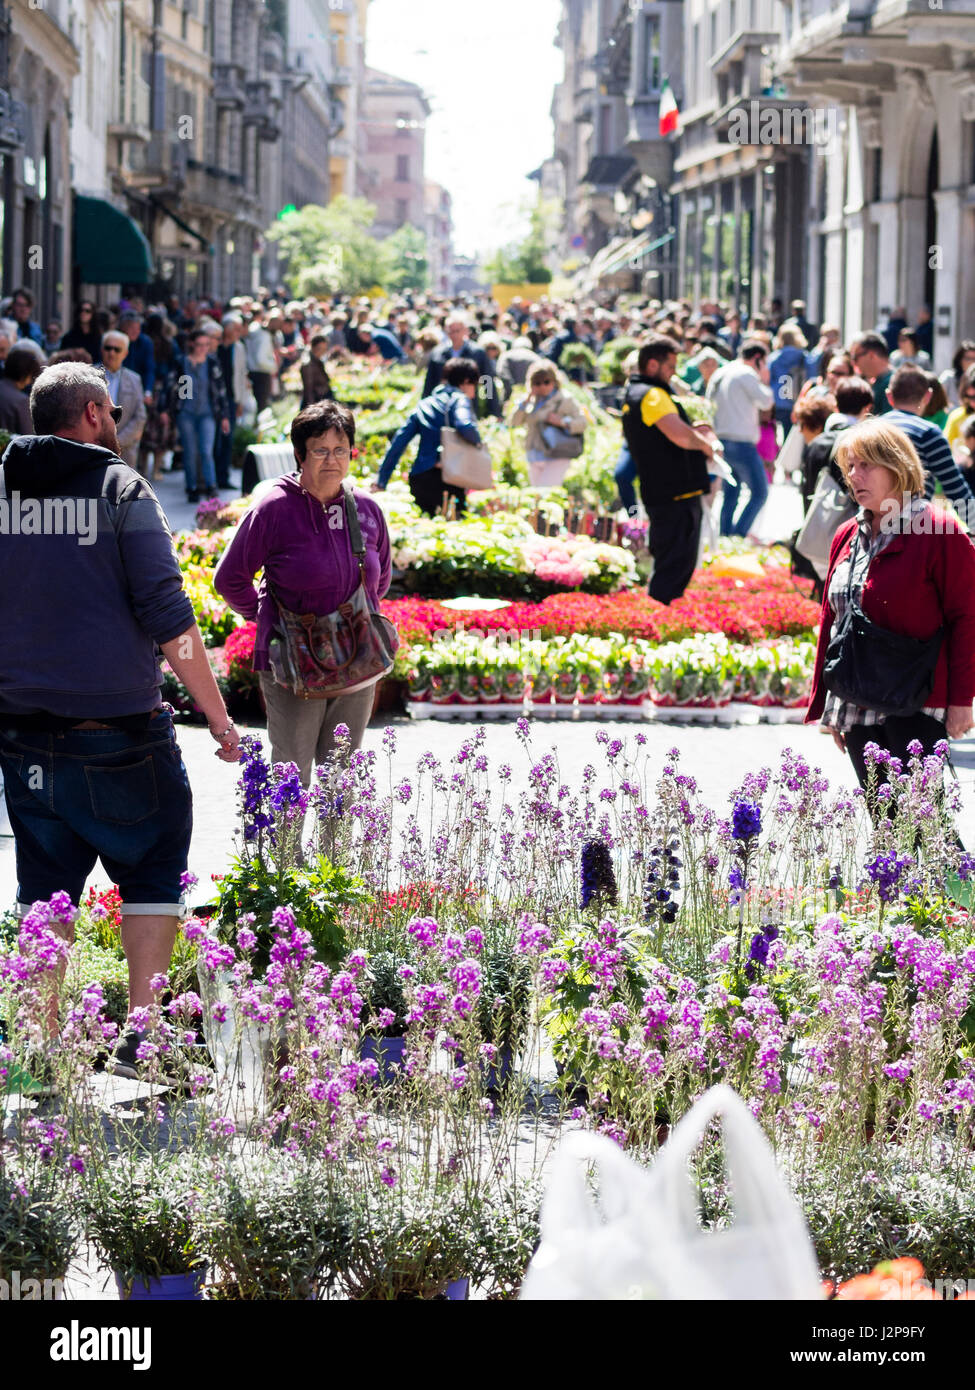 Crowded Botanic Invasions event - street flower and plants open market - Cremona, Italy Spring 30th April 2017 Stock Photo